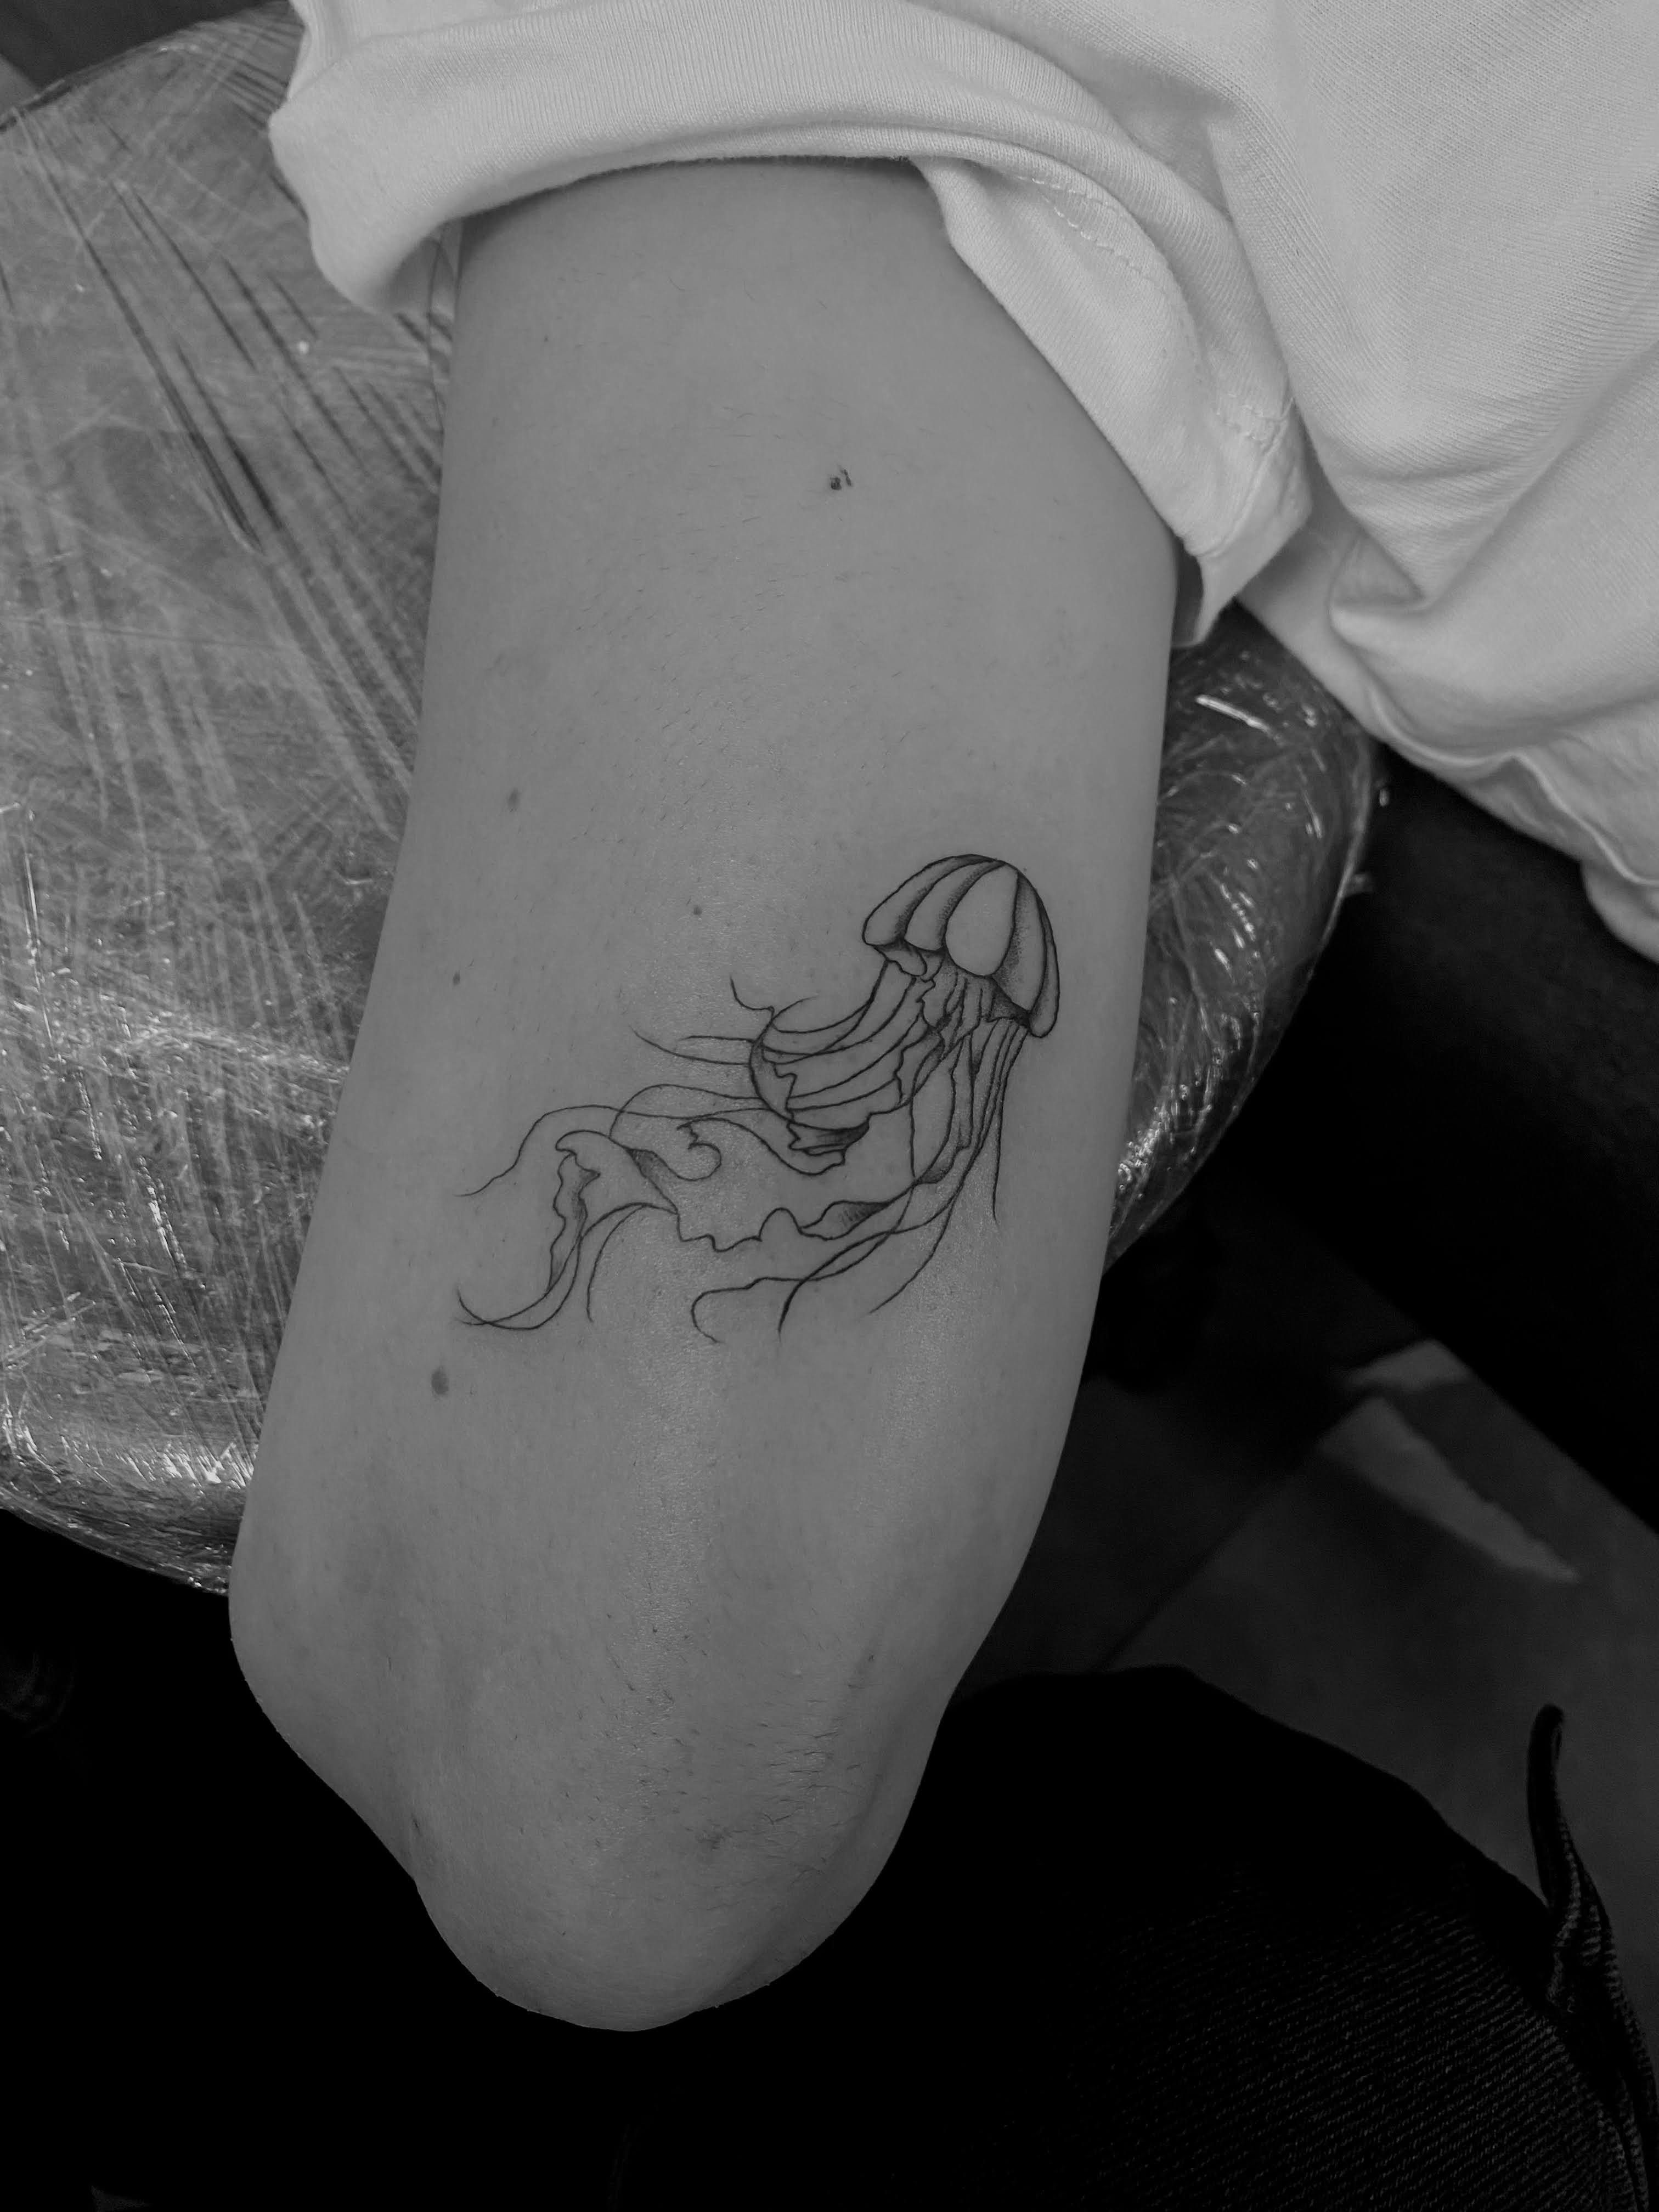 Jellyfish Tattoo: Meanings and Ideas – neartattoos